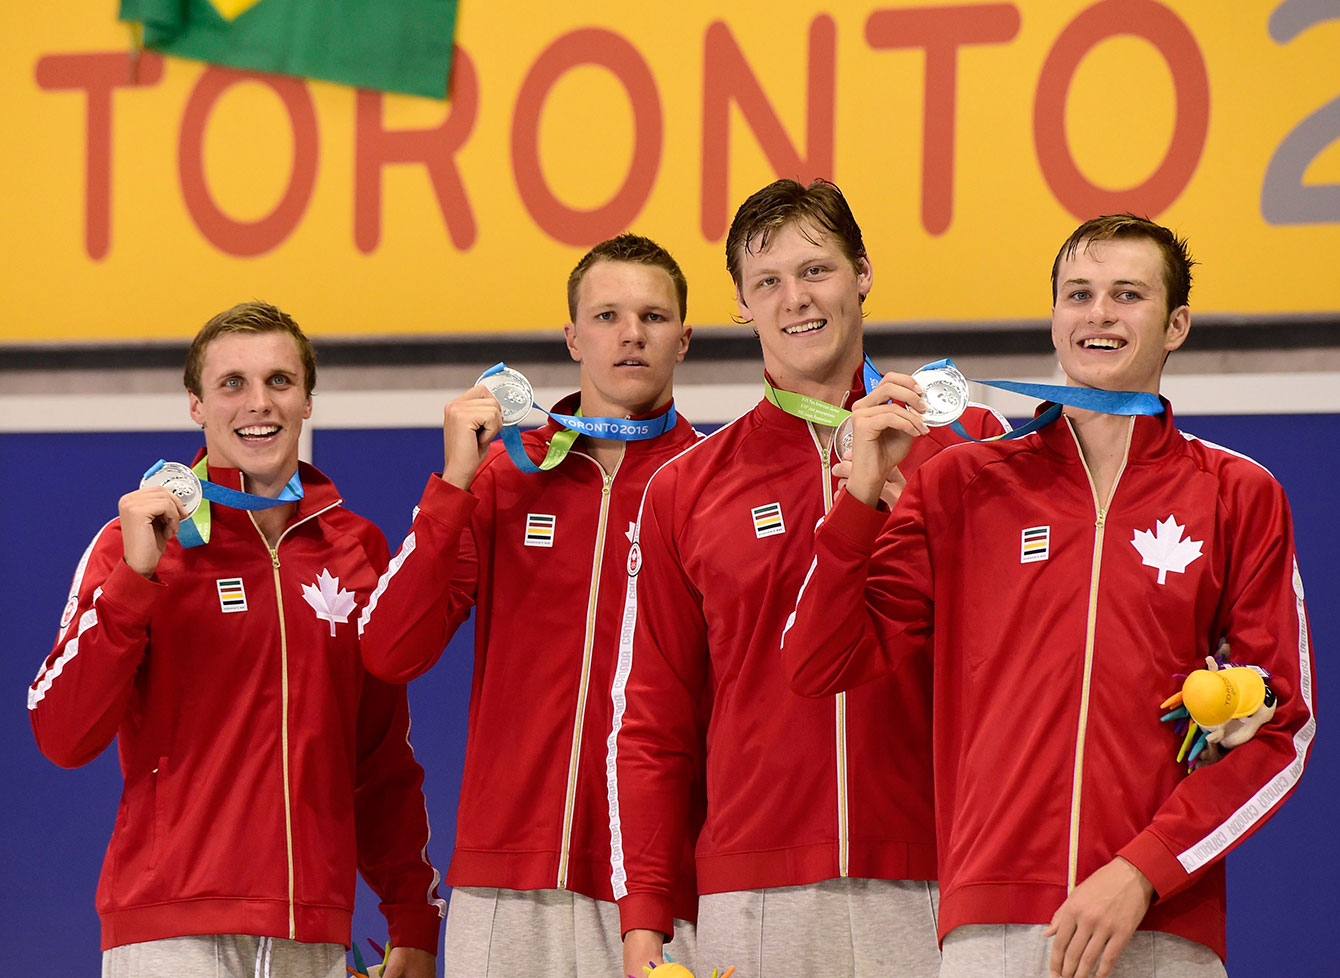 Canadian swimmers Santo Condorelli, left to right, Karl Krug, Evan Van Moerkerke and Yuri Kisil smile as they hold their medals after a second place finish in the men's 4x100 freestyle at TO2015.